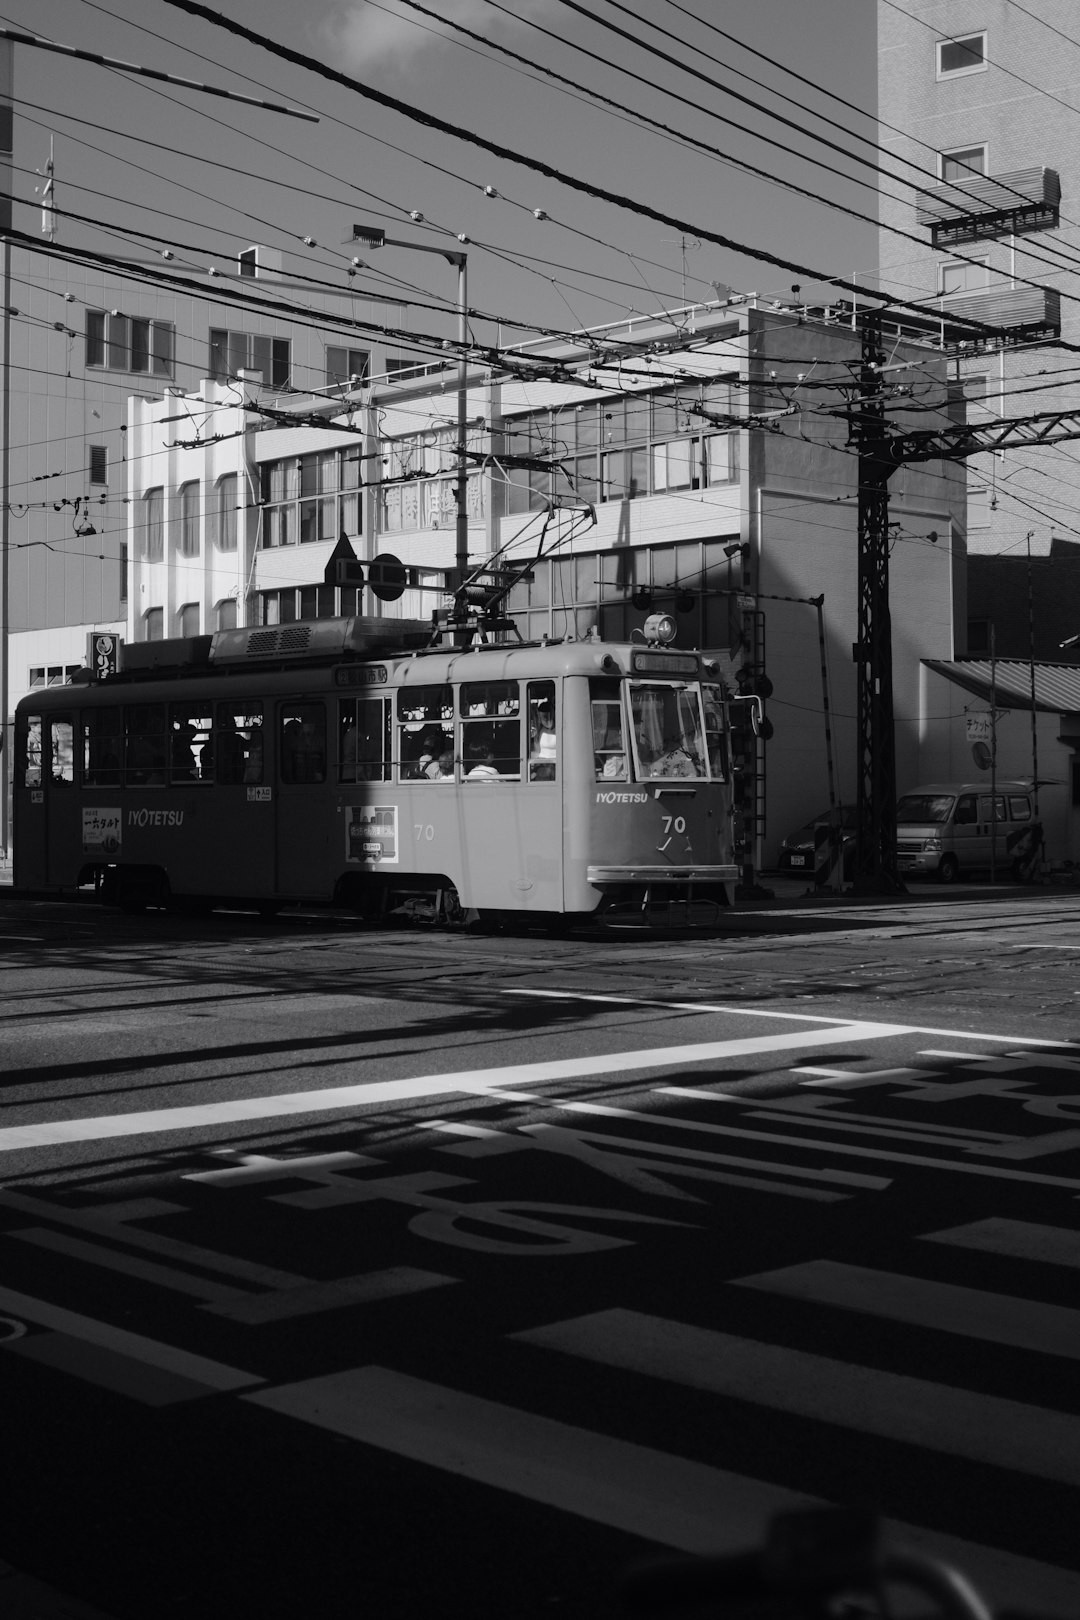 grayscale photo of tram on road